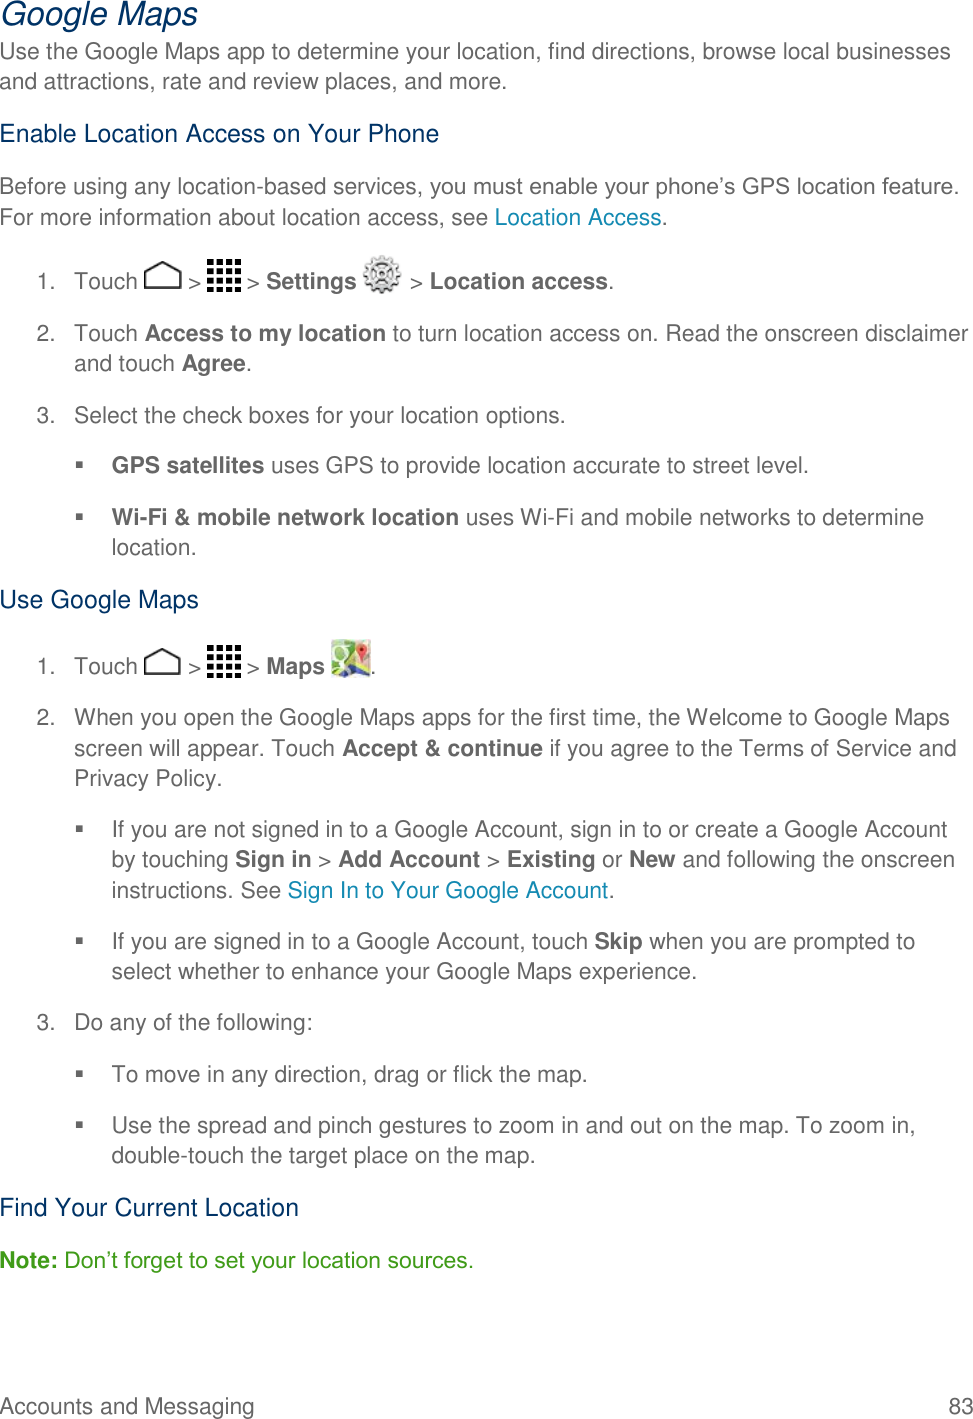 Accounts and Messaging    83 Google Maps Use the Google Maps app to determine your location, find directions, browse local businesses and attractions, rate and review places, and more.  Enable Location Access on Your Phone Before using any location-based services, you must enable your phone’s GPS location feature. For more information about location access, see Location Access.  1.  Touch   &gt;   &gt; Settings   &gt; Location access. 2.  Touch Access to my location to turn location access on. Read the onscreen disclaimer and touch Agree. 3.  Select the check boxes for your location options.  GPS satellites uses GPS to provide location accurate to street level.  Wi-Fi &amp; mobile network location uses Wi-Fi and mobile networks to determine location. Use Google Maps 1.  Touch   &gt;   &gt; Maps  . 2.  When you open the Google Maps apps for the first time, the Welcome to Google Maps screen will appear. Touch Accept &amp; continue if you agree to the Terms of Service and Privacy Policy.   If you are not signed in to a Google Account, sign in to or create a Google Account by touching Sign in &gt; Add Account &gt; Existing or New and following the onscreen instructions. See Sign In to Your Google Account.   If you are signed in to a Google Account, touch Skip when you are prompted to select whether to enhance your Google Maps experience. 3.  Do any of the following:    To move in any direction, drag or flick the map.   Use the spread and pinch gestures to zoom in and out on the map. To zoom in, double-touch the target place on the map. Find Your Current Location Note: Don’t forget to set your location sources. 